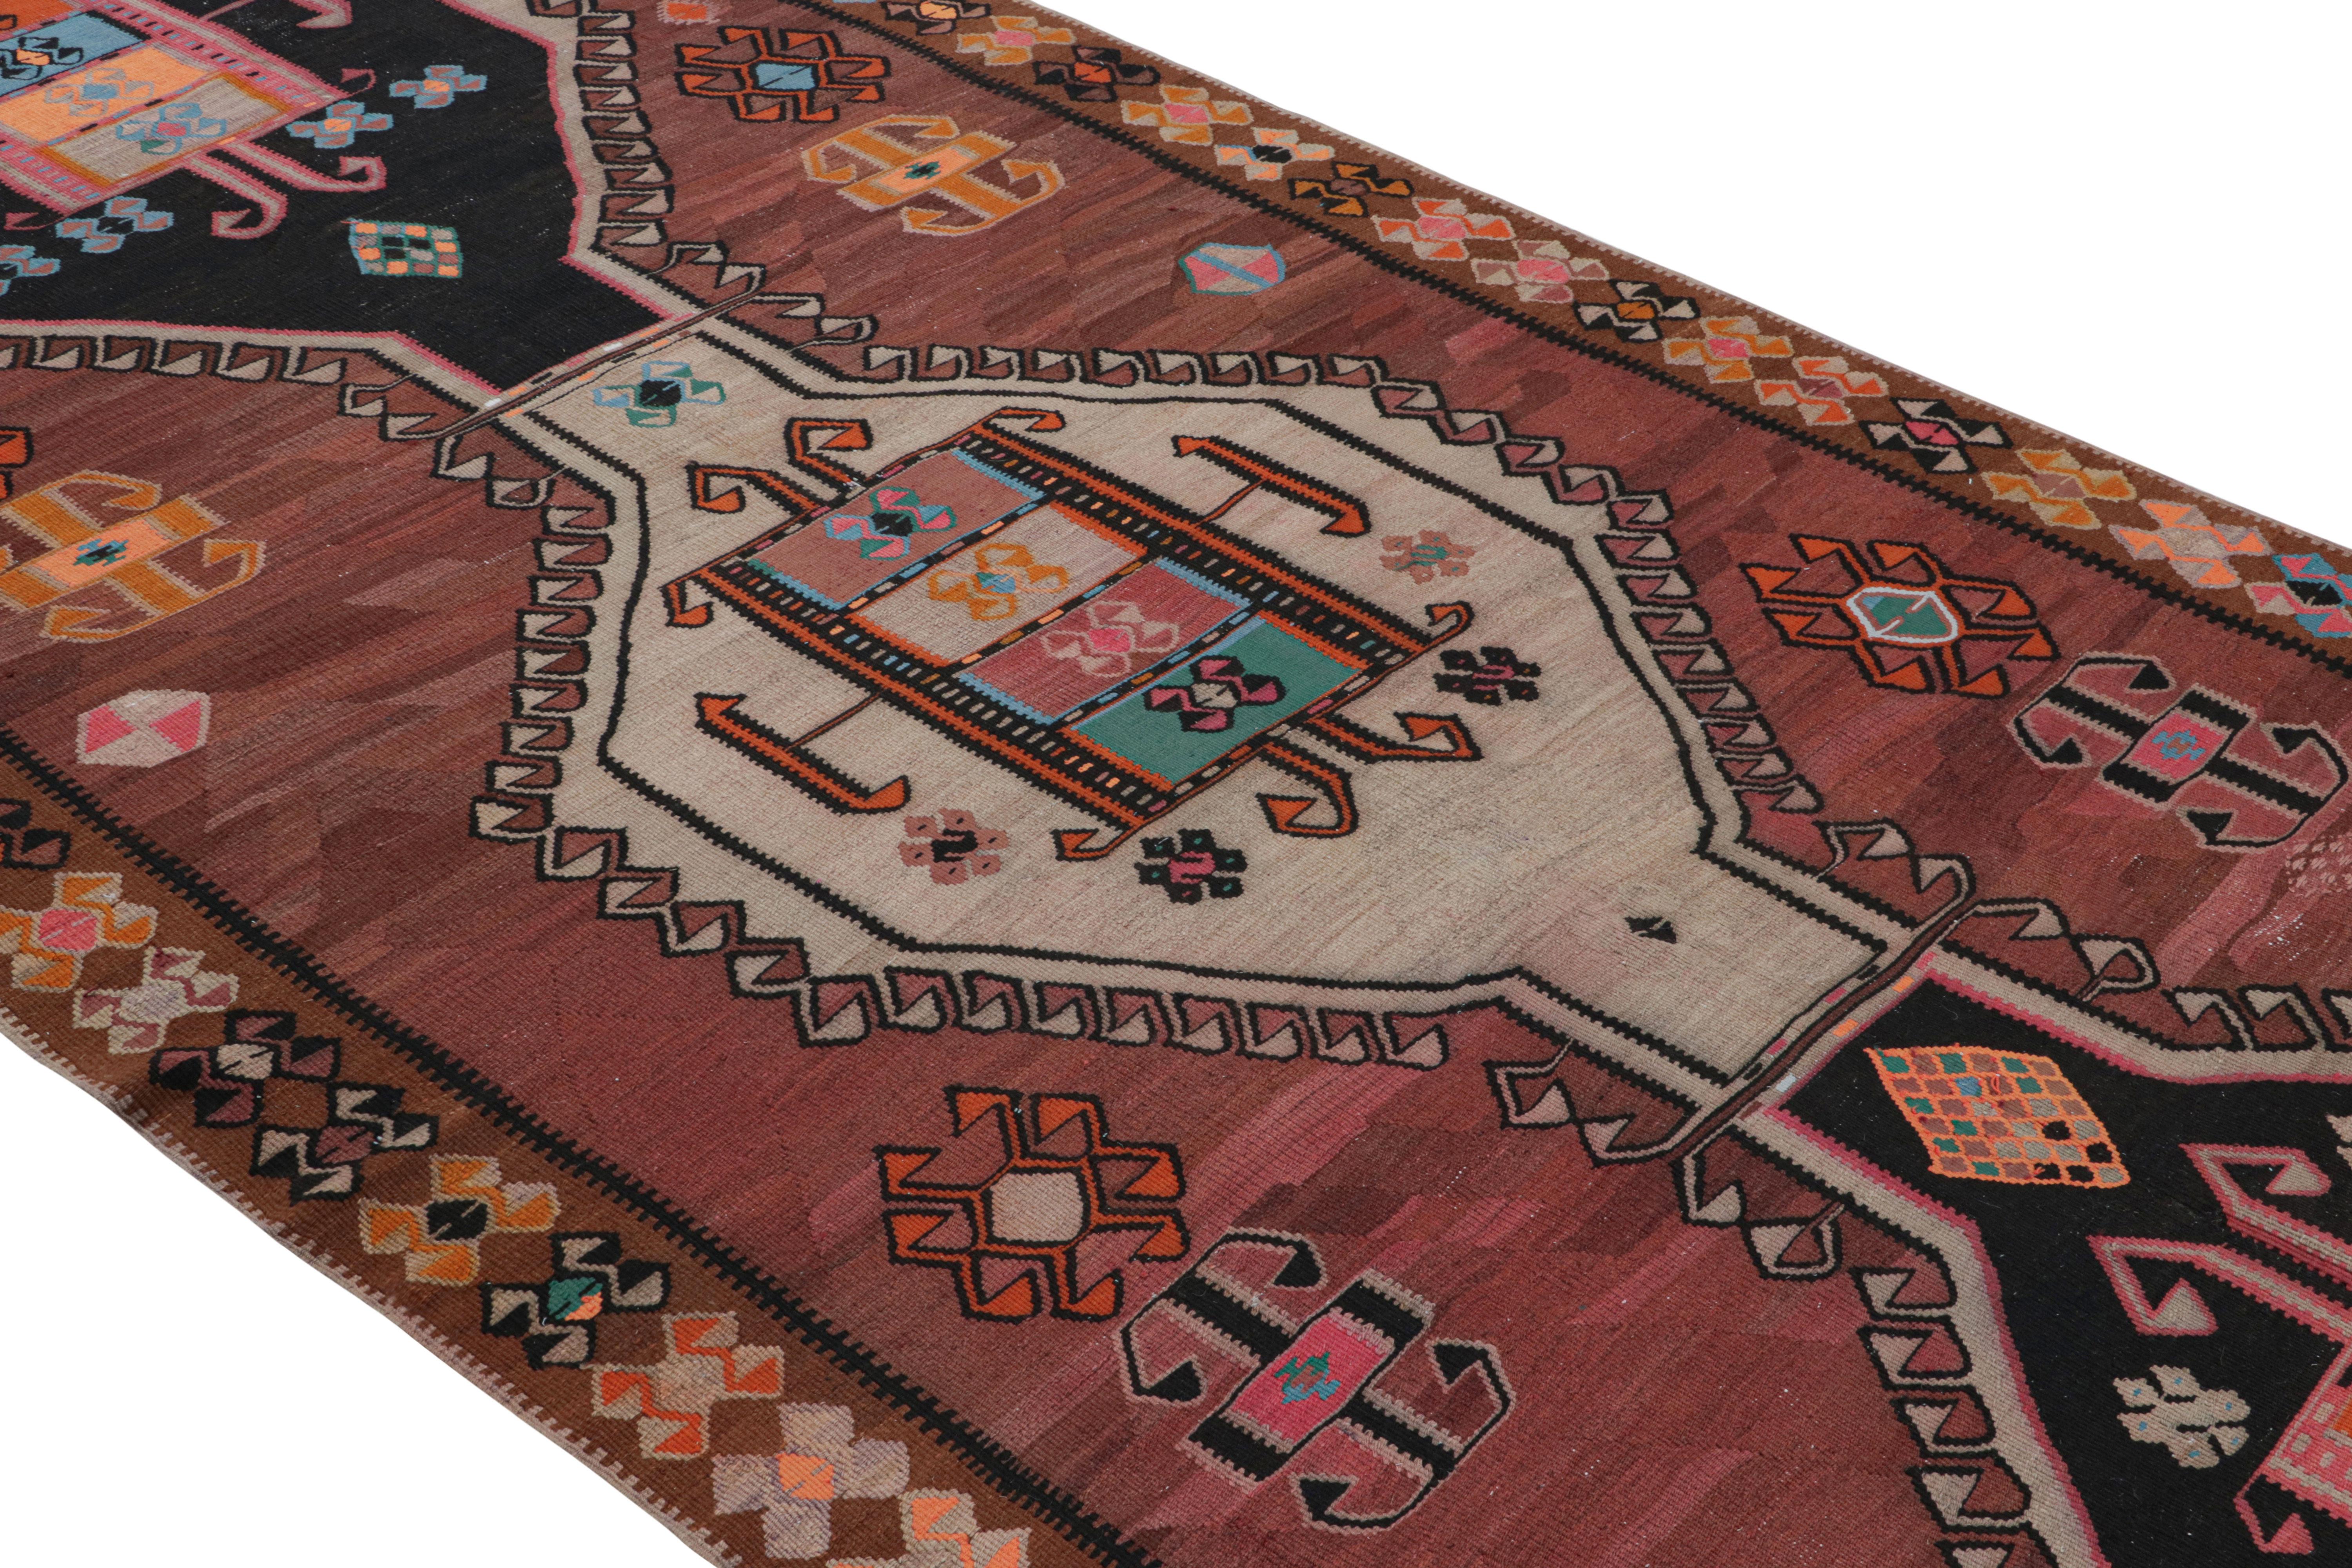 A midcentury vintage tribal kilim, this piece originated in Turkey, handwoven between 1950-1960. The vintage Turkish flat-weave rug comprises wool in a colorway that reads primarily brown, black and beige, rich earth tones bringing out a pleasing